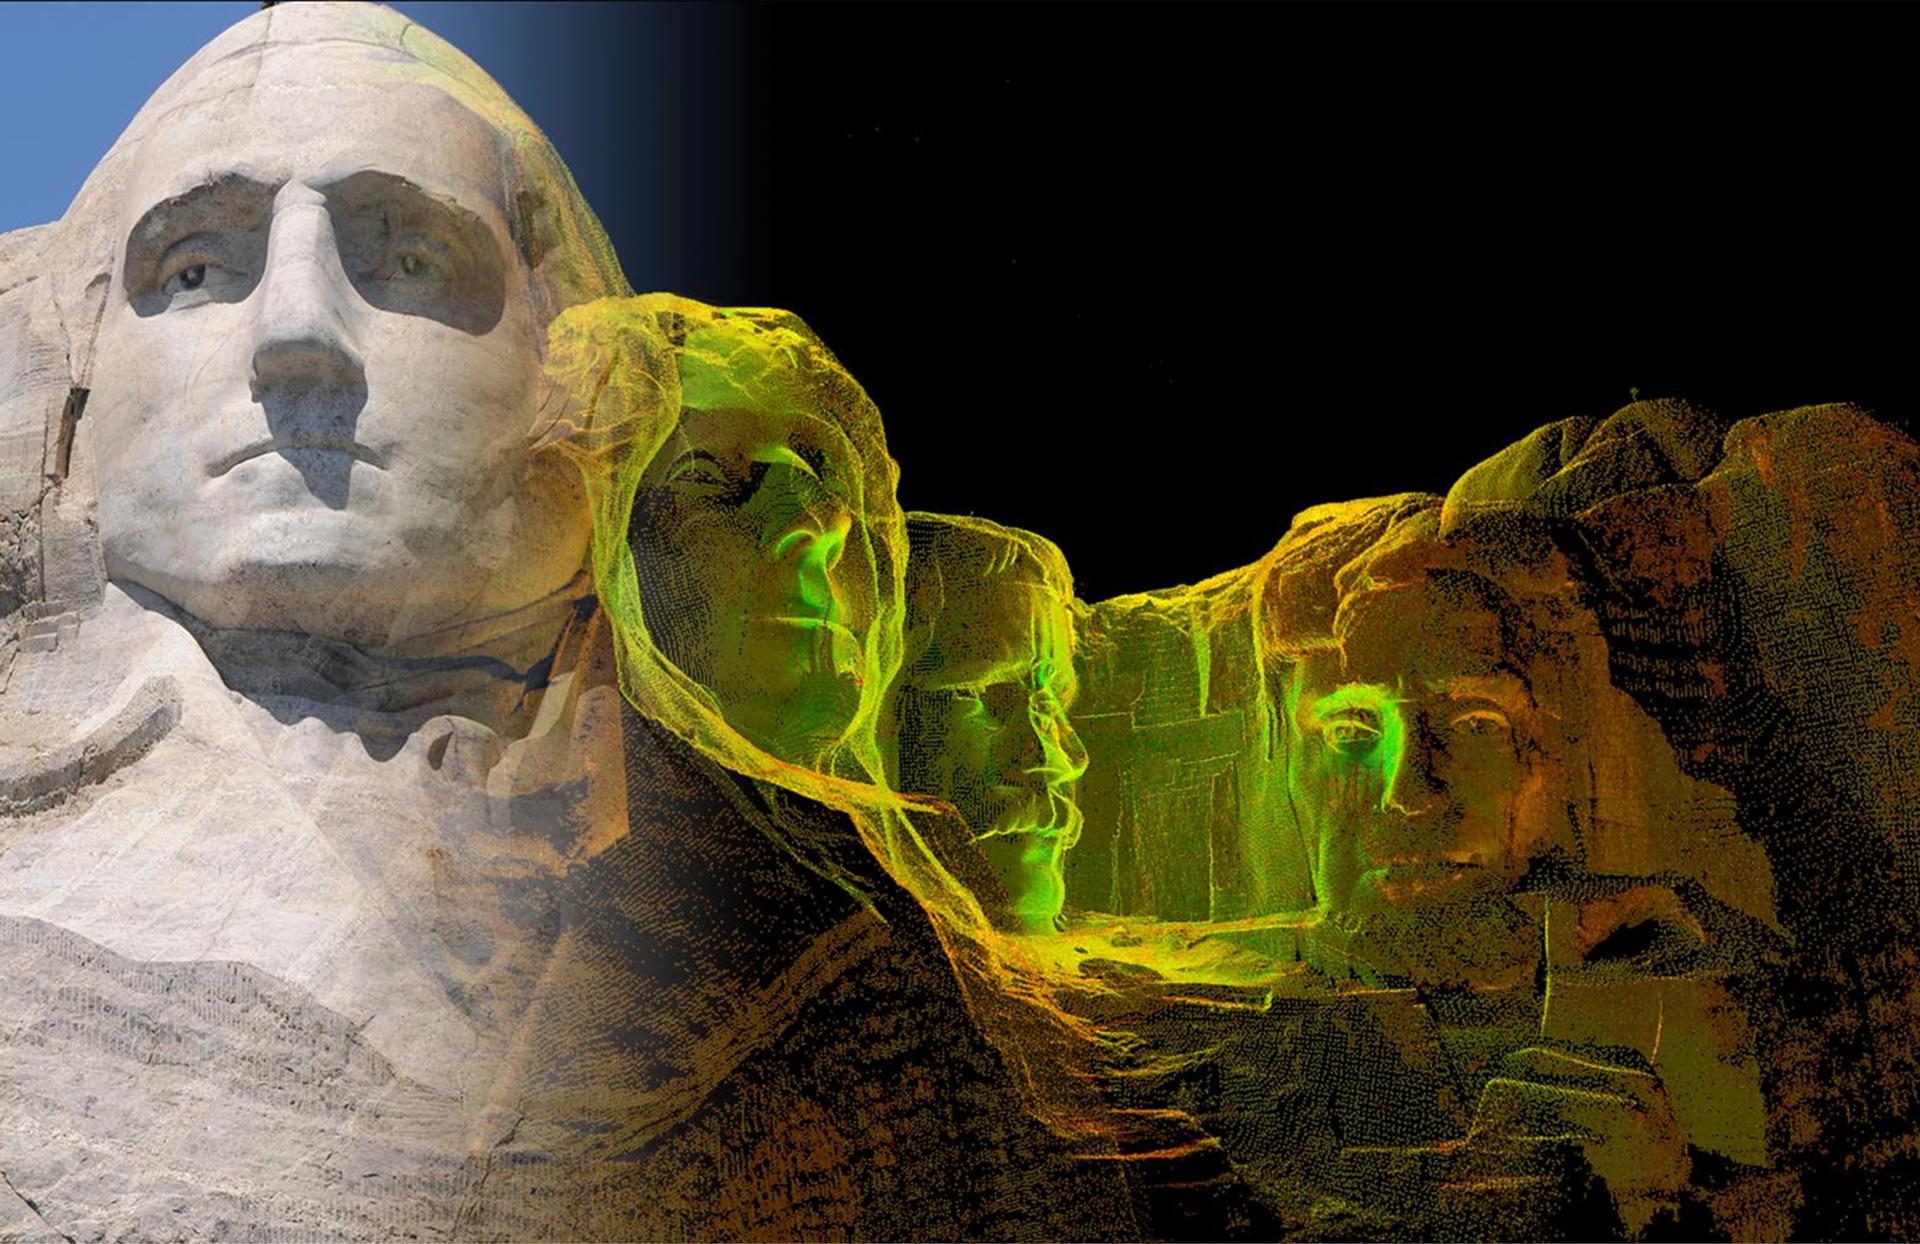 Laser scan in CyArk’s archive from field work done at Mount Rushmore in the US.